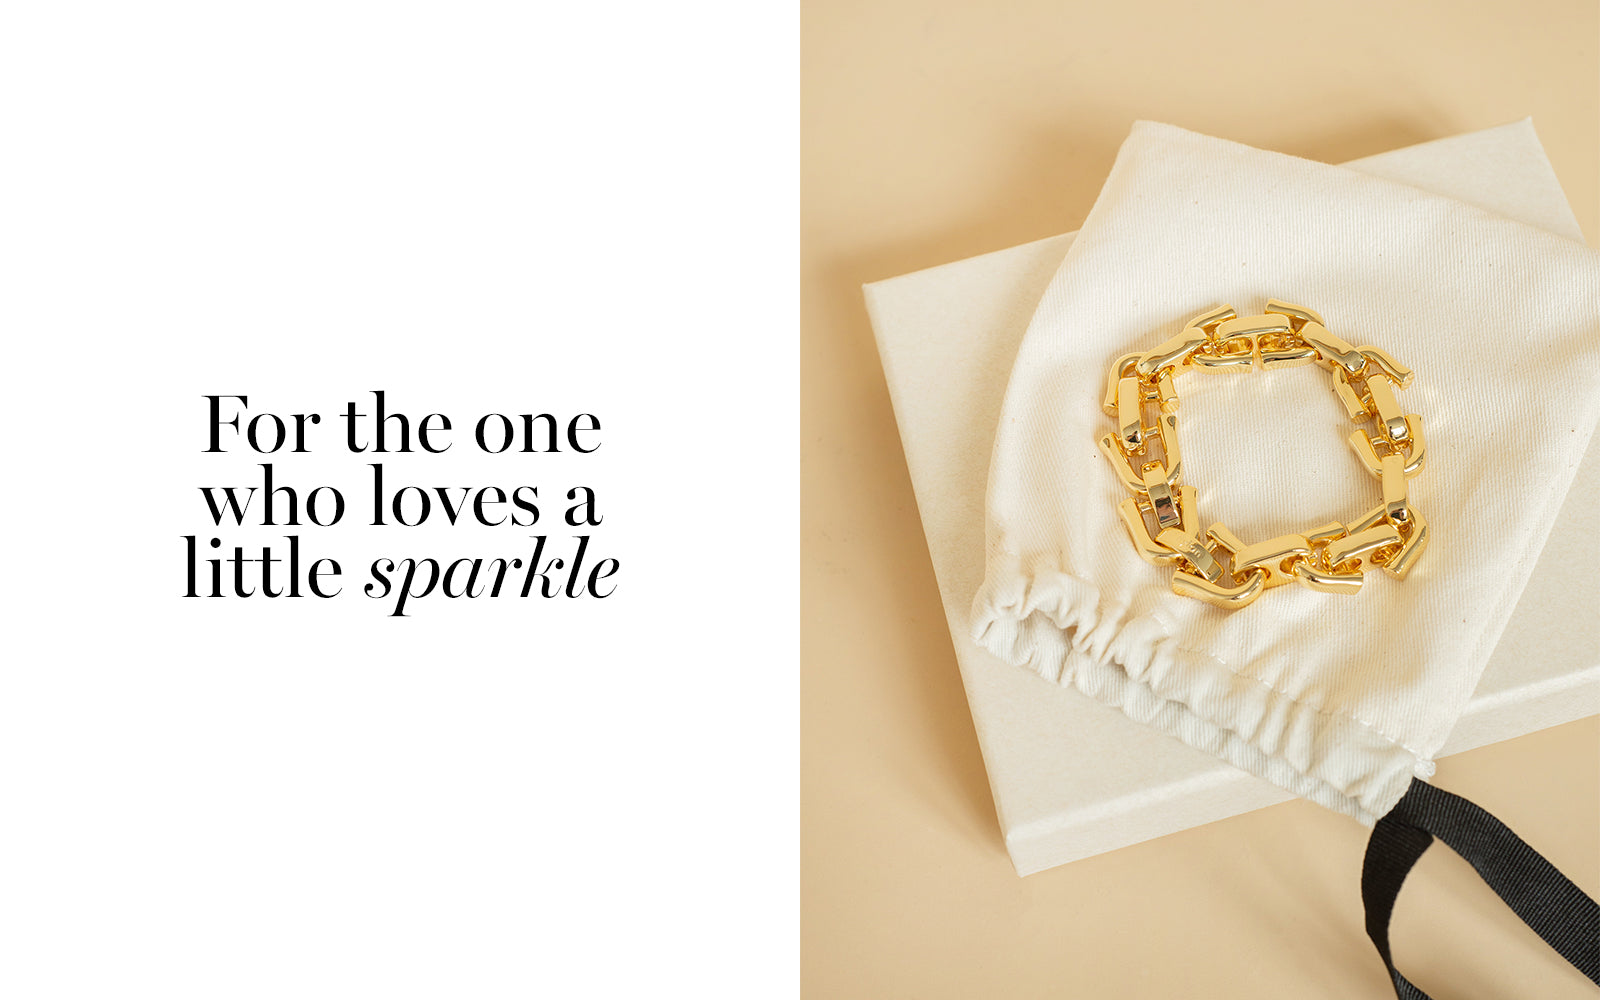 For the one who loves a little sparkle